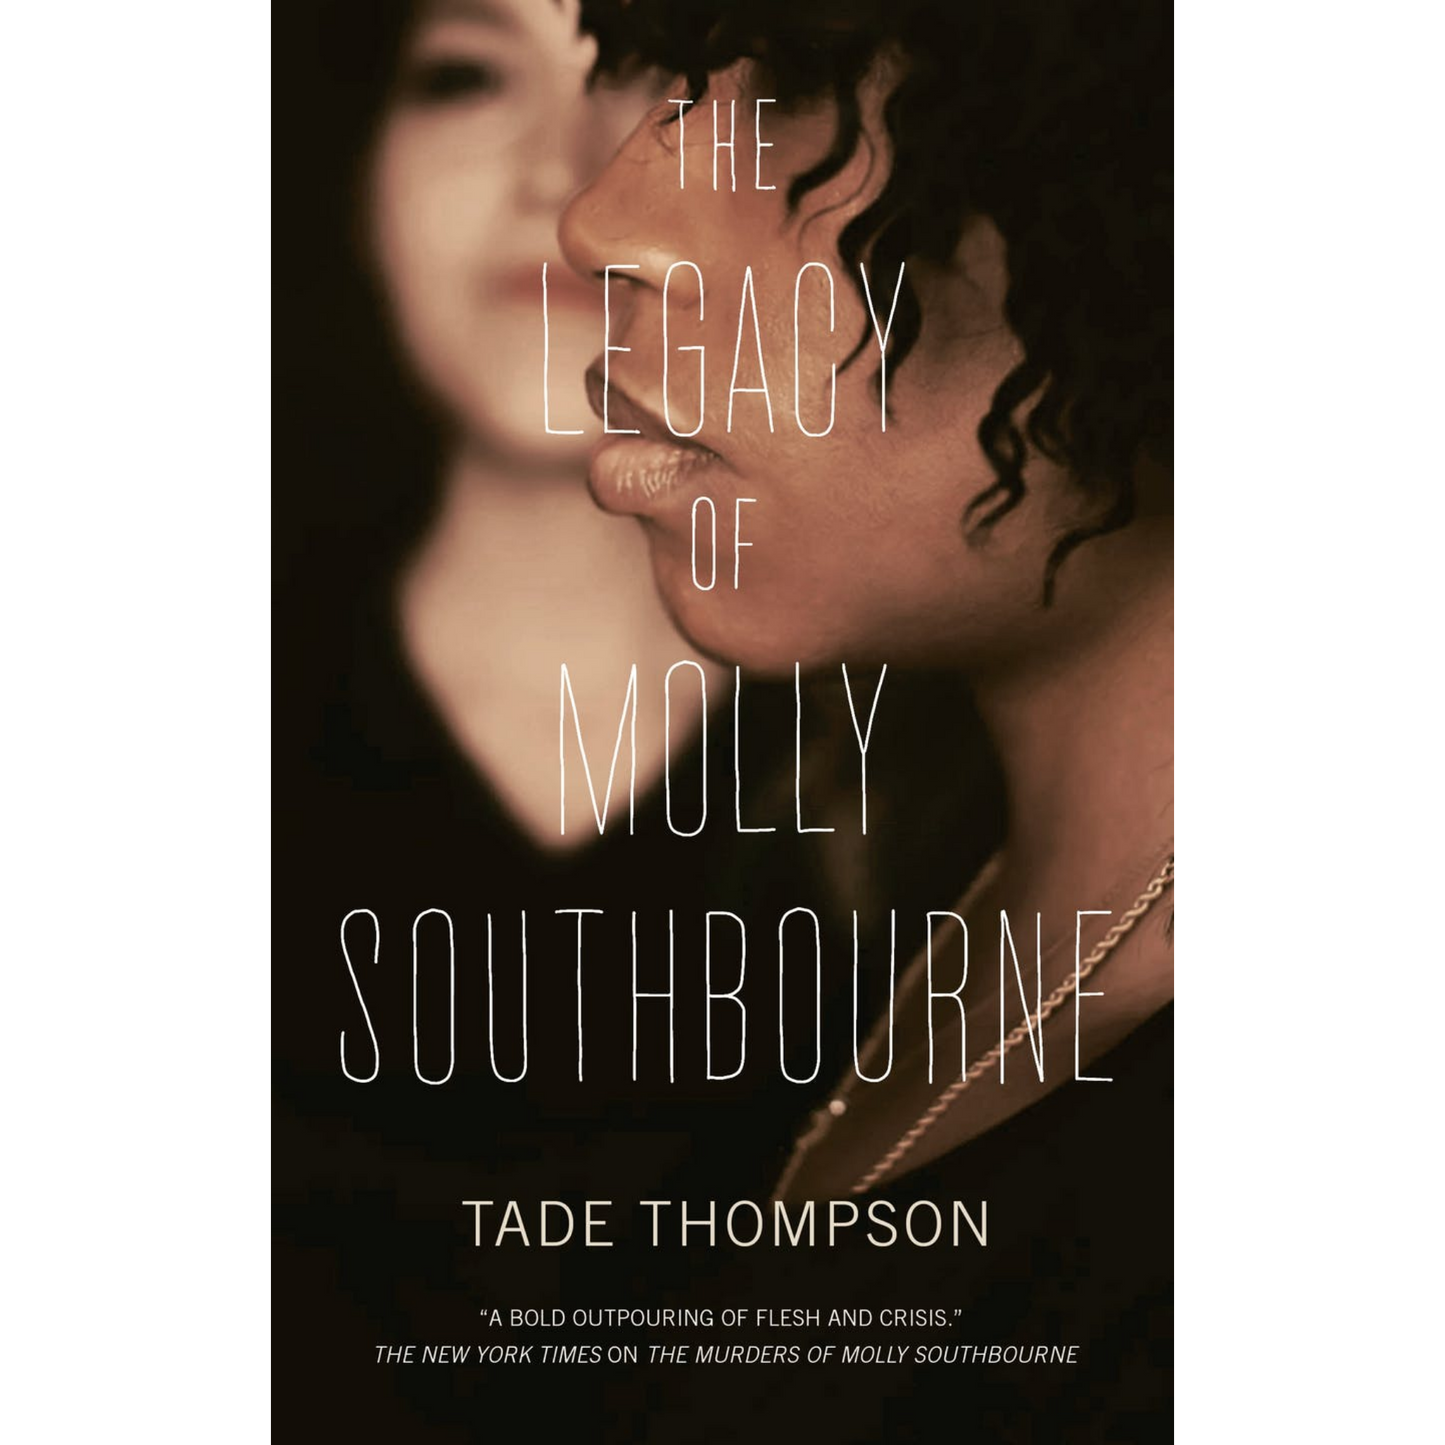 the legacy of molly southbourne tade thompson